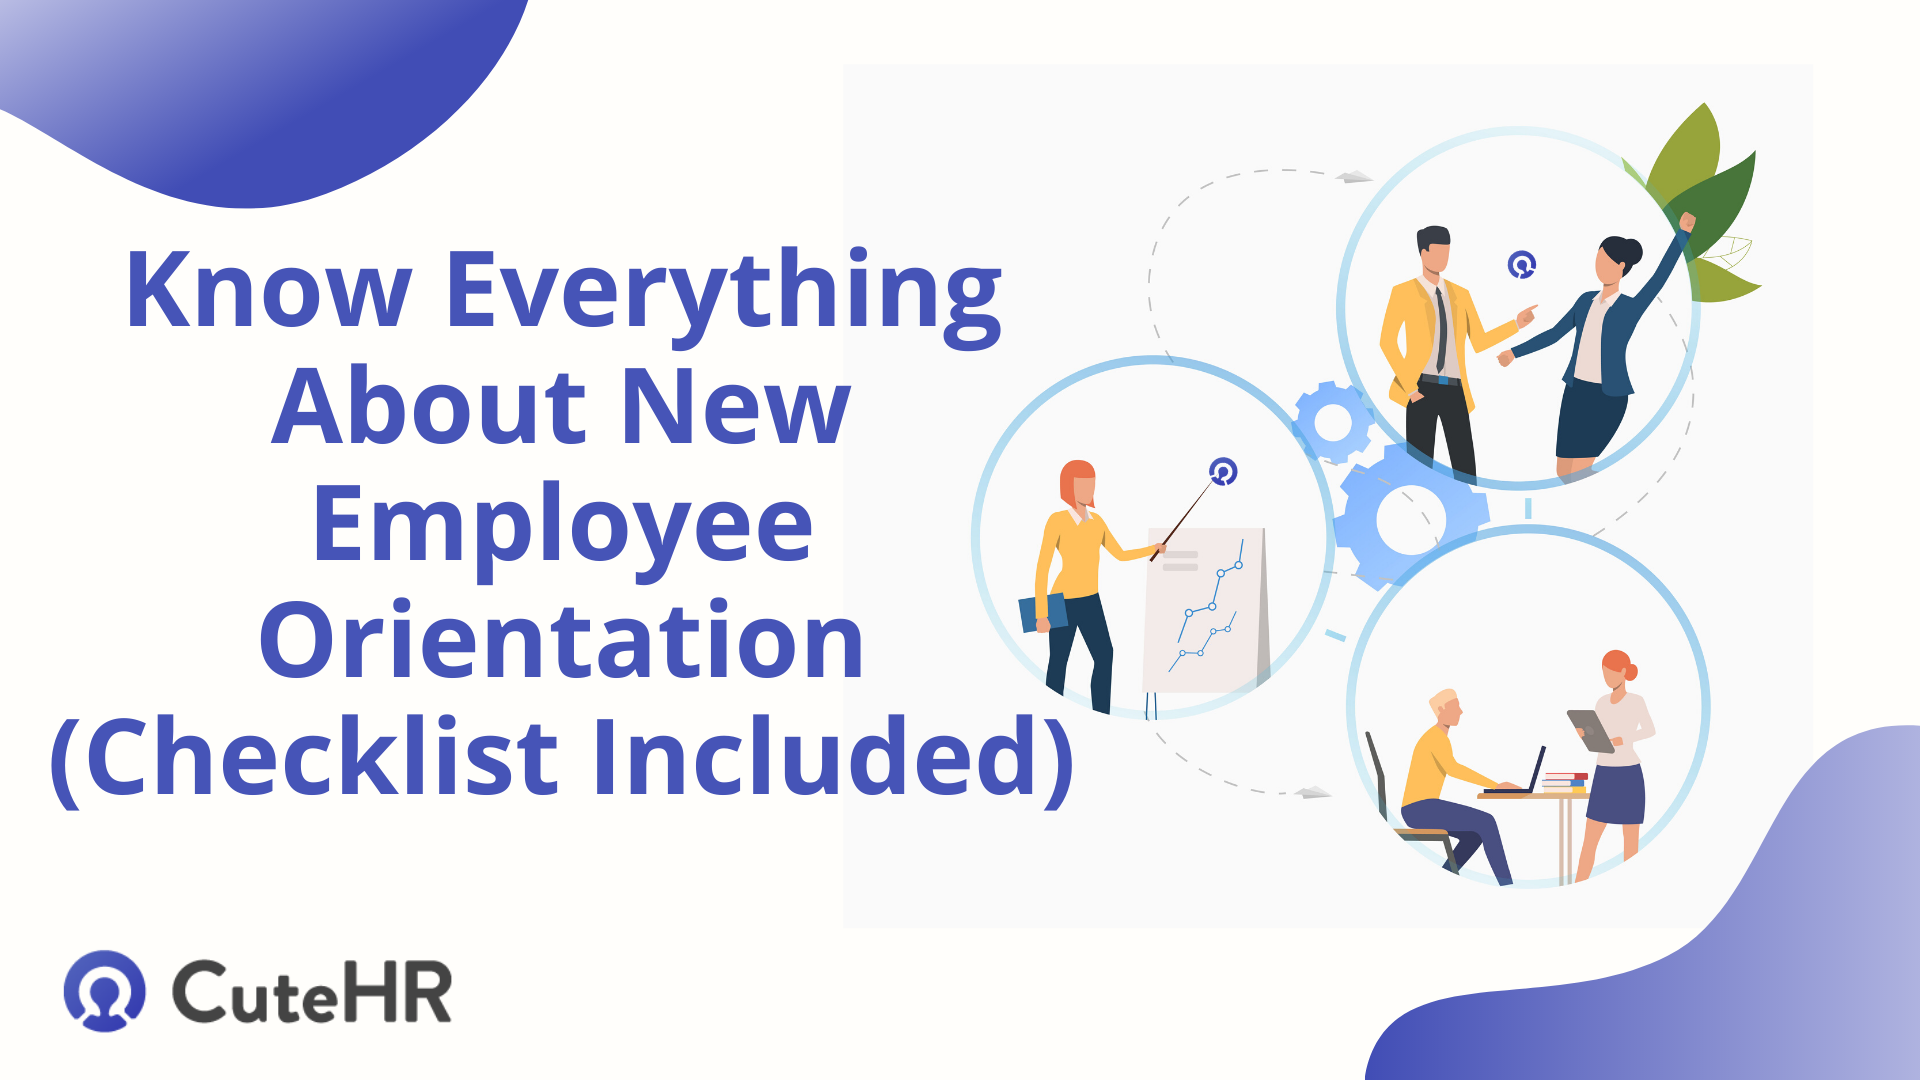 Know Everything About New Employee Orientation (Checklist Included)